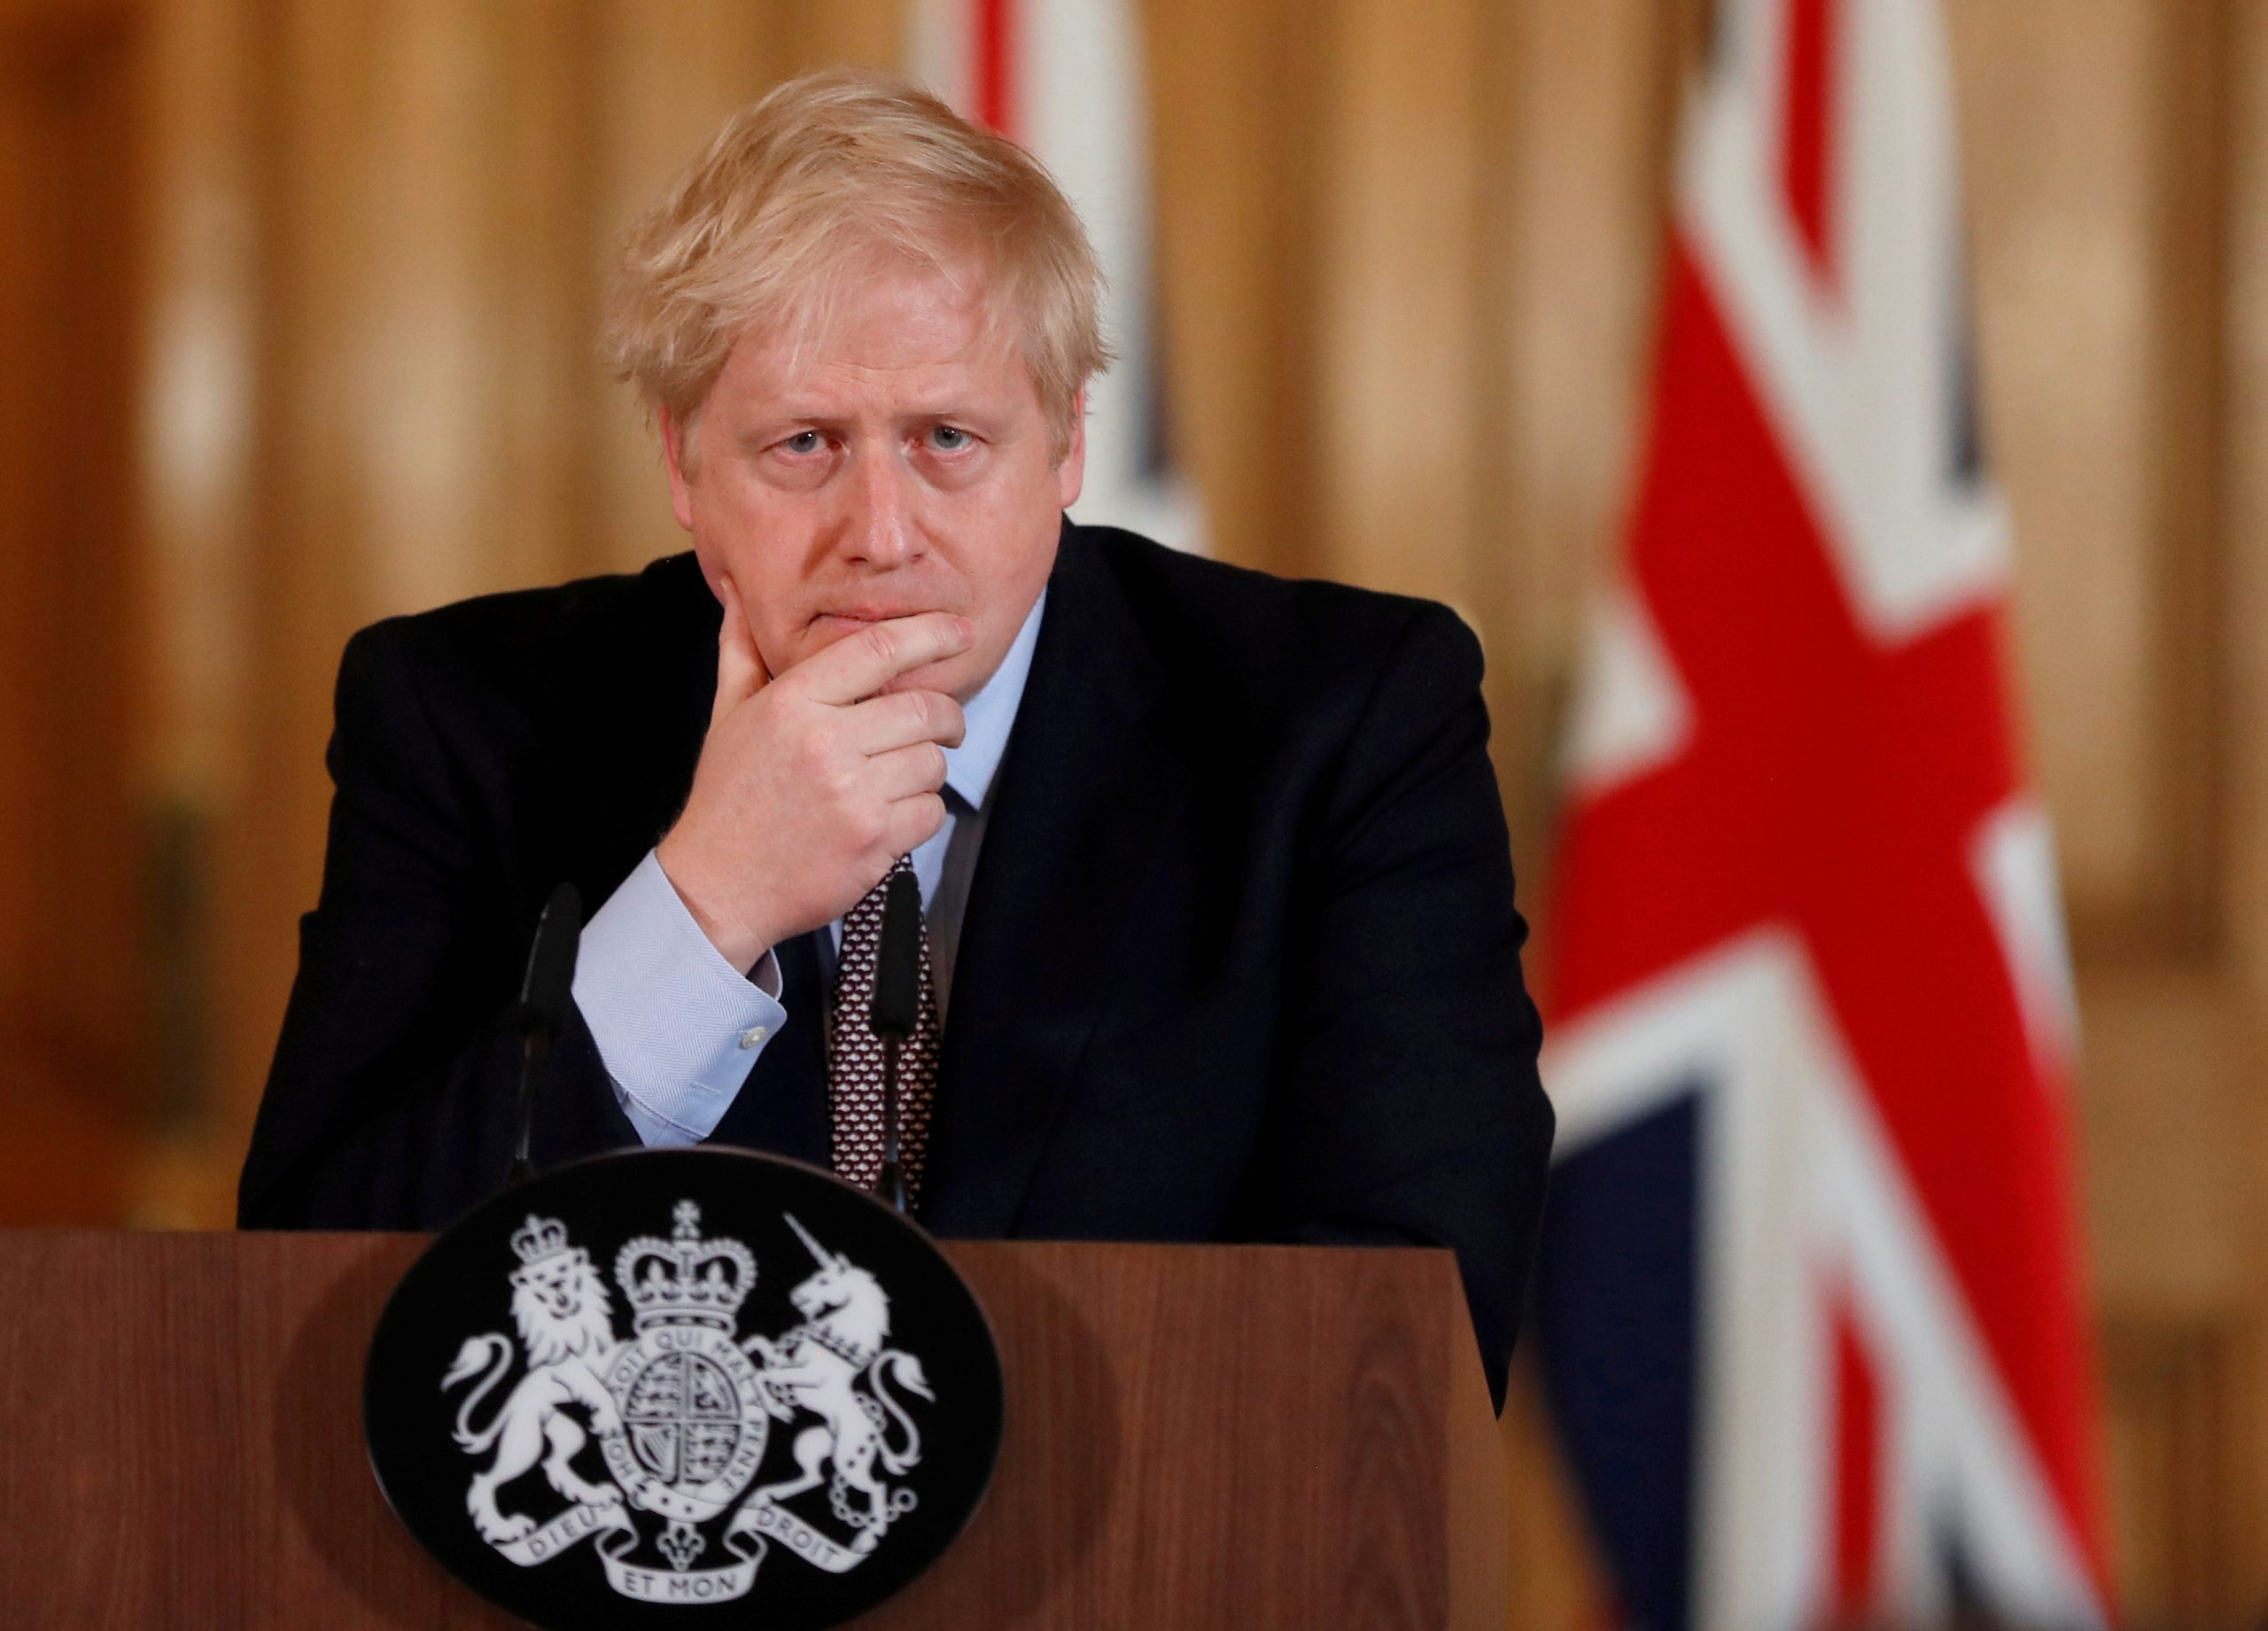 FILE PHOTO: Britain's Prime Minister Boris Johnson attends a news conference on the novel coronavirus, in London FILE PHOTO: Britain's Prime Minister Boris Johnson speaks during a news conference on the novel coronavirus, in London, Britain March 3, 2020.   To match Special Report HEALTH-CORONAVIRUS/BRITAIN-PATH   Frank Augstein/Pool via REUTERS/File Photo POOL New